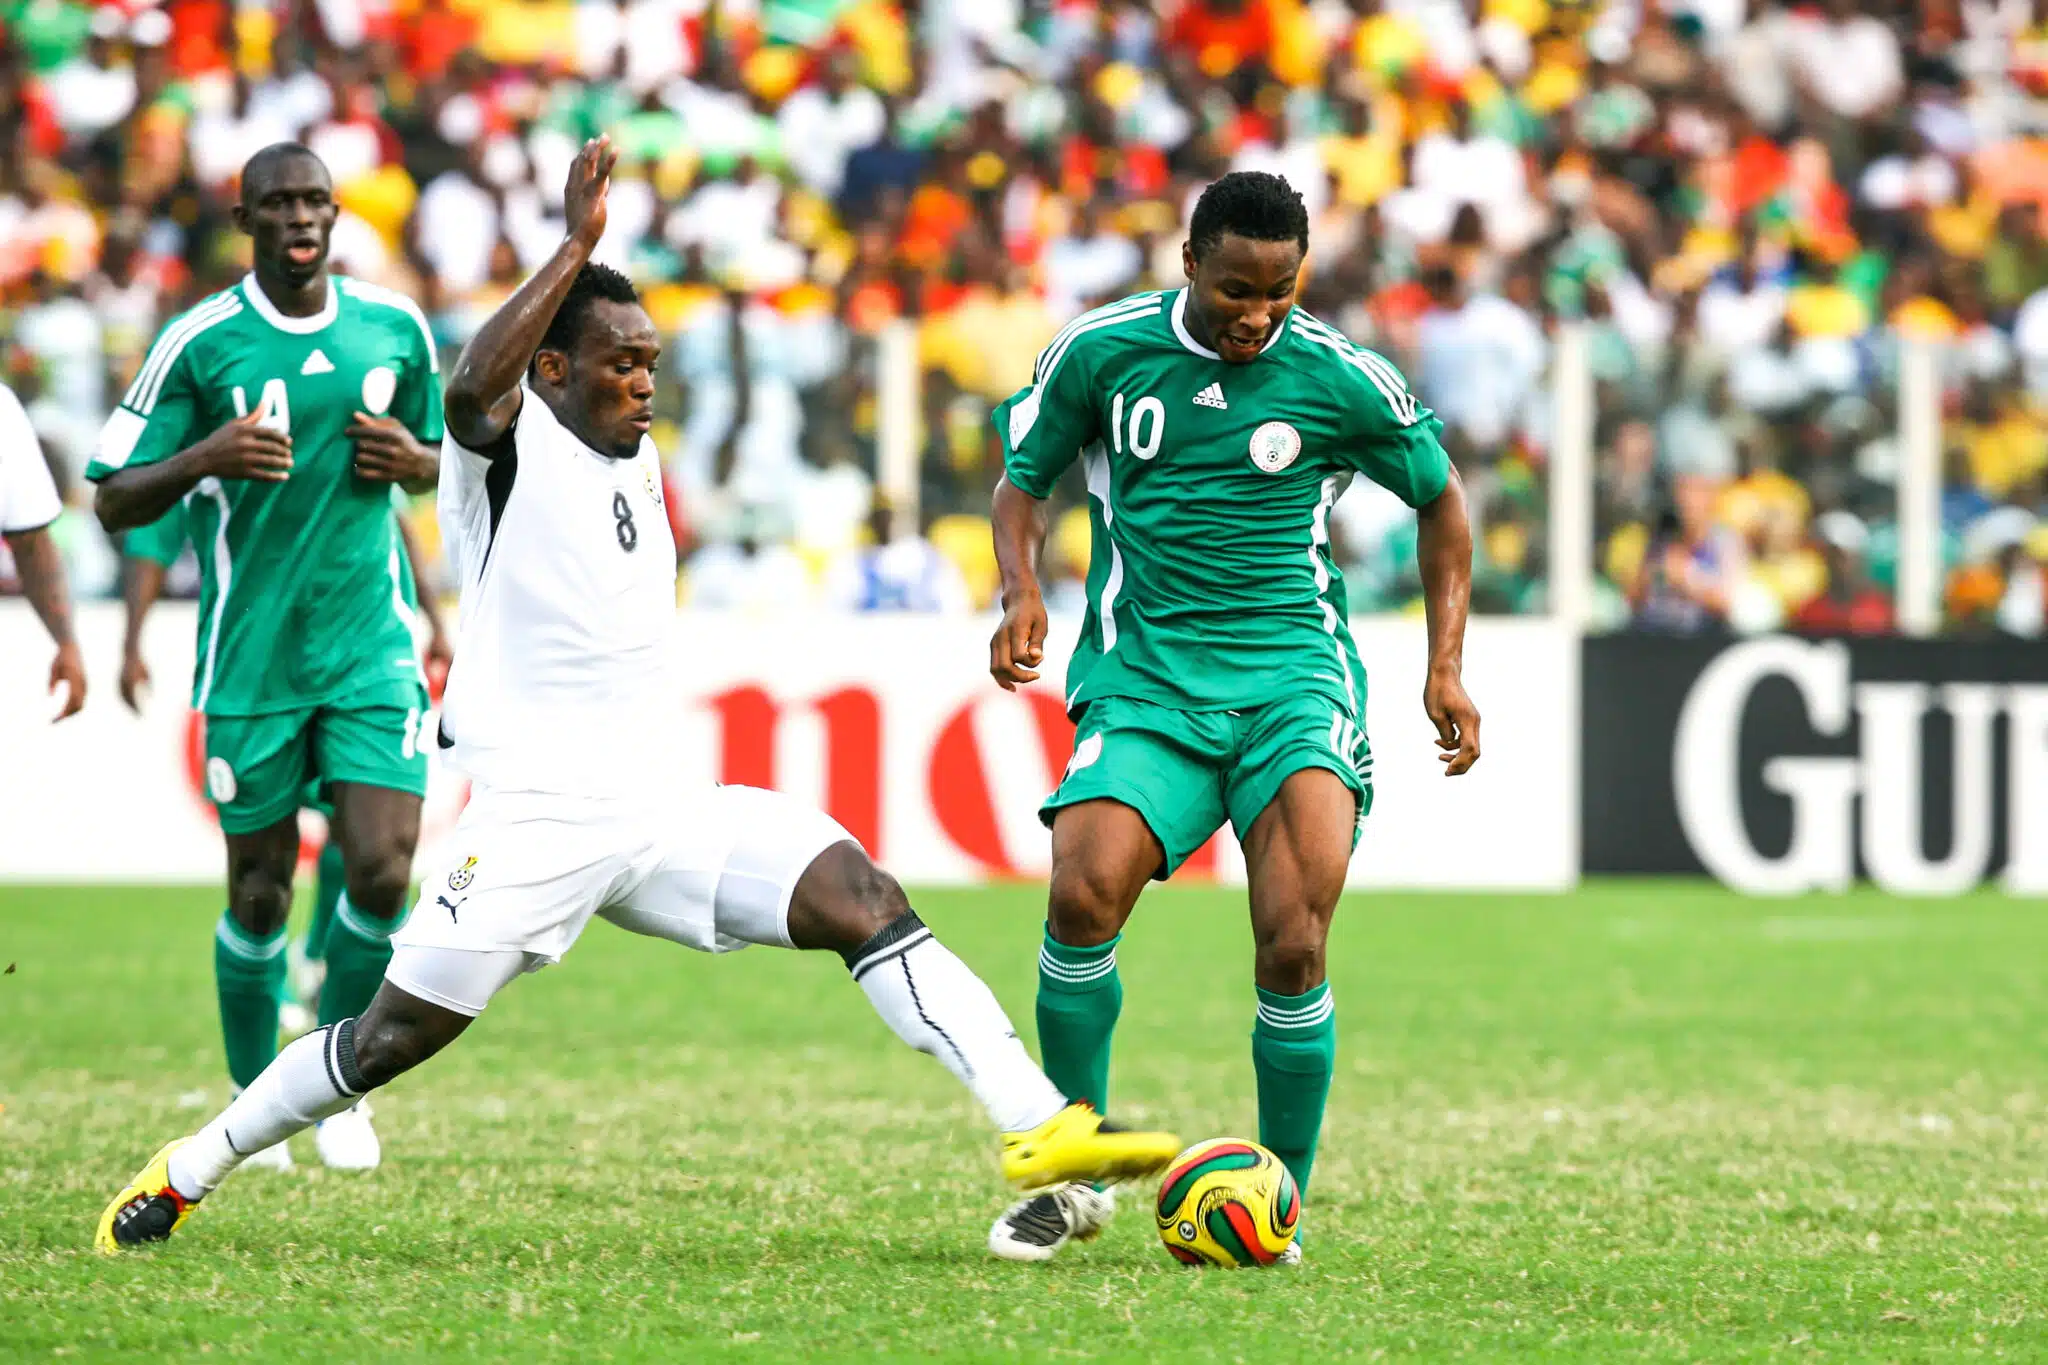 Previewing the ‘Jollof Derby’: How anticipation builds for Nigeria vs Ghana clash in Marrakech